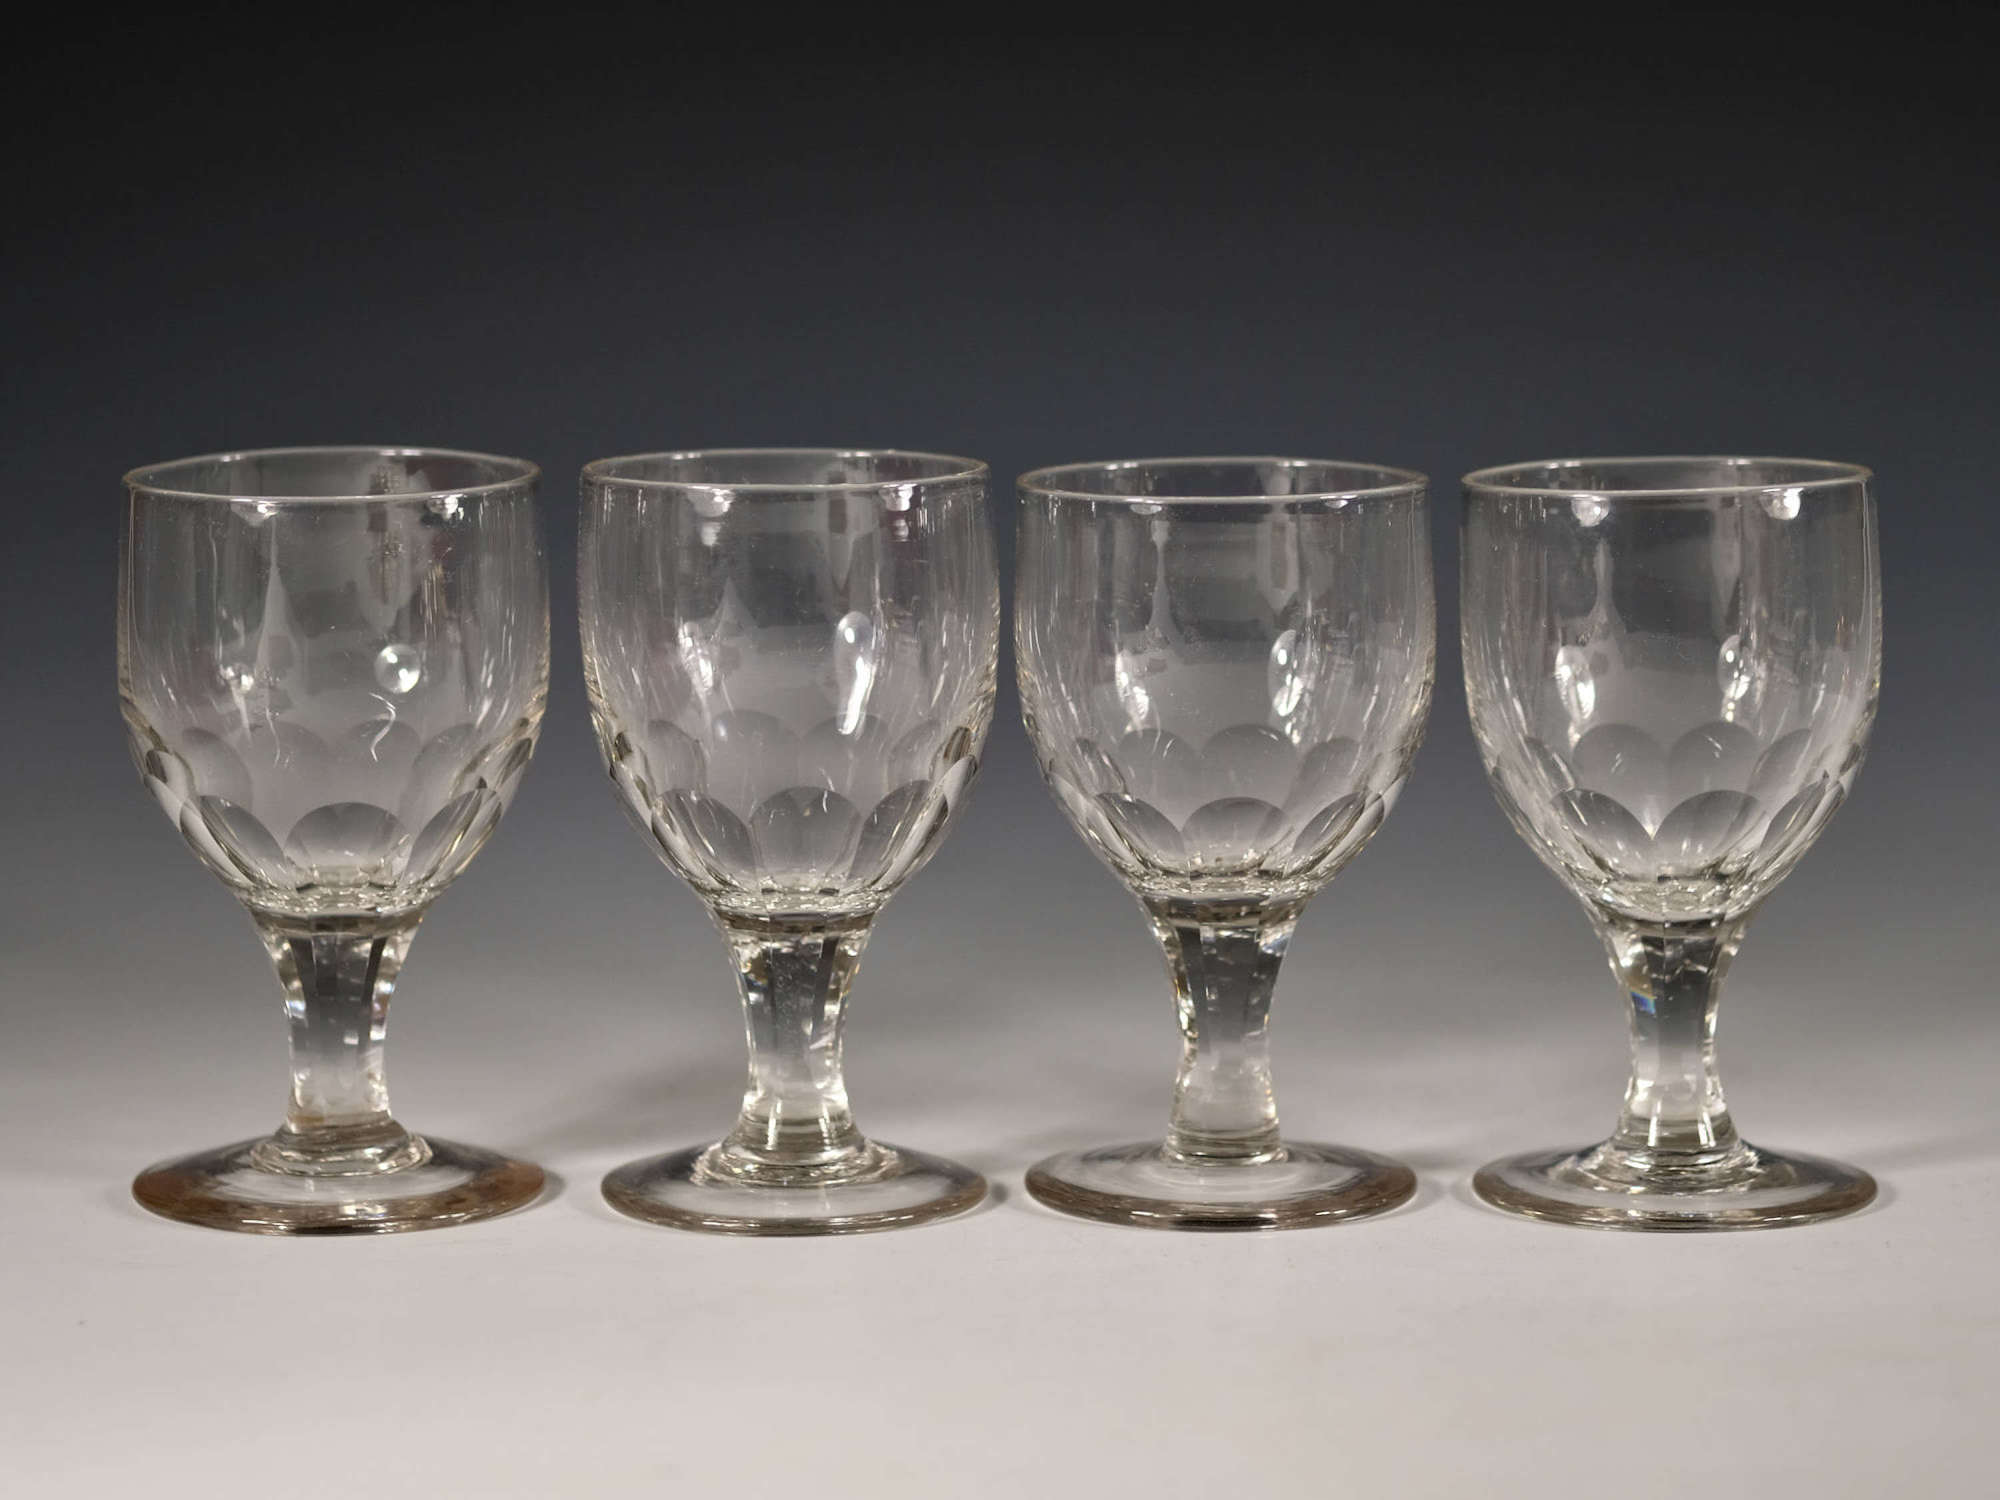 Rummers set of four c1860